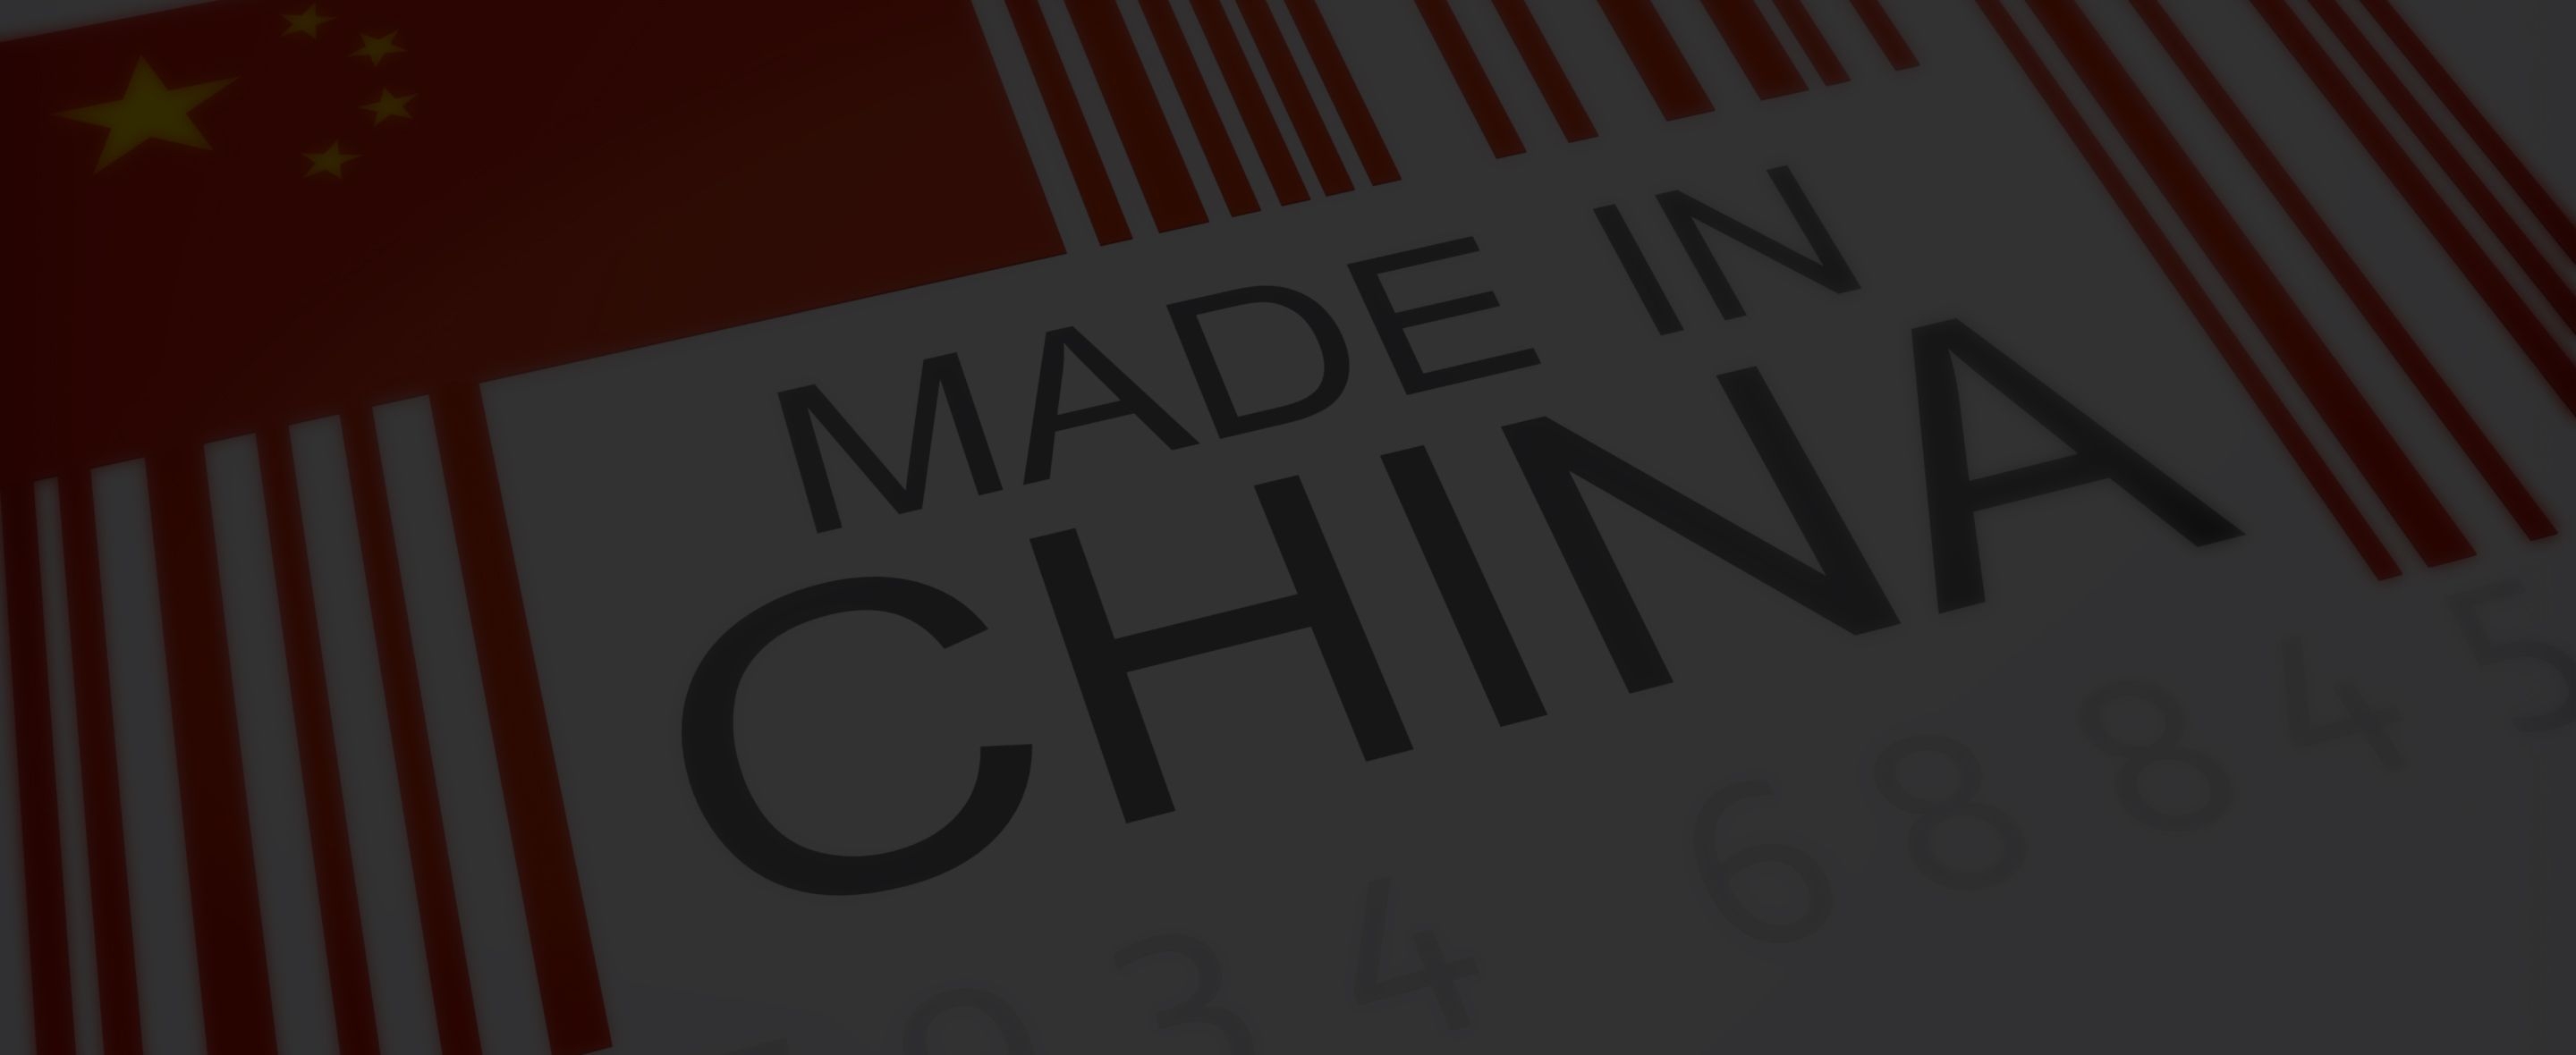 Tips for importing from China- Header.jpg